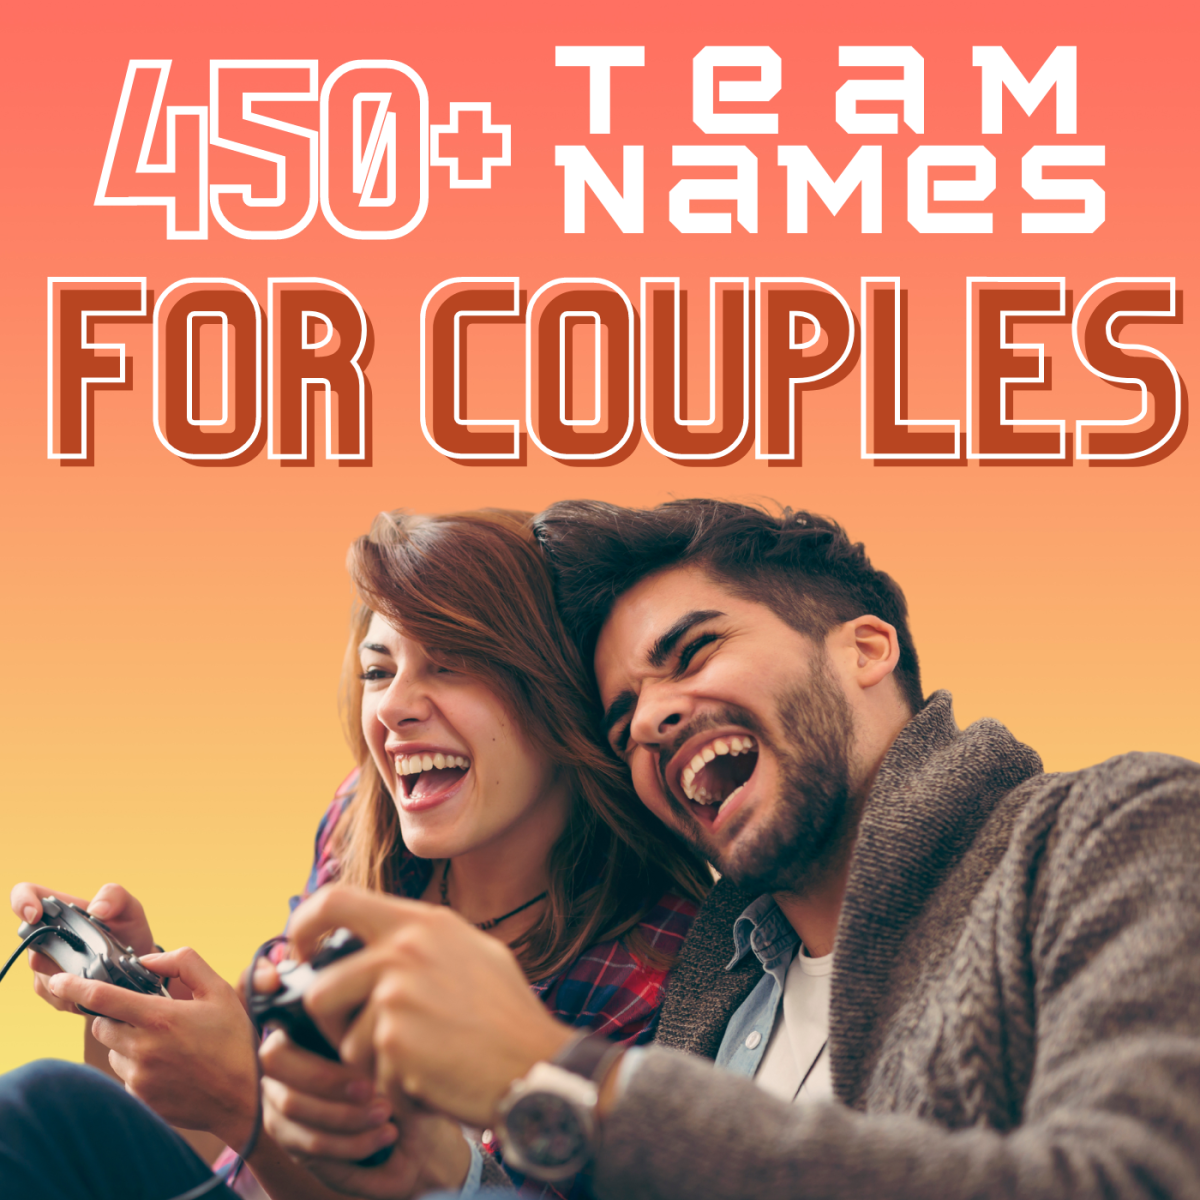 450+ Best Team Names for Couples